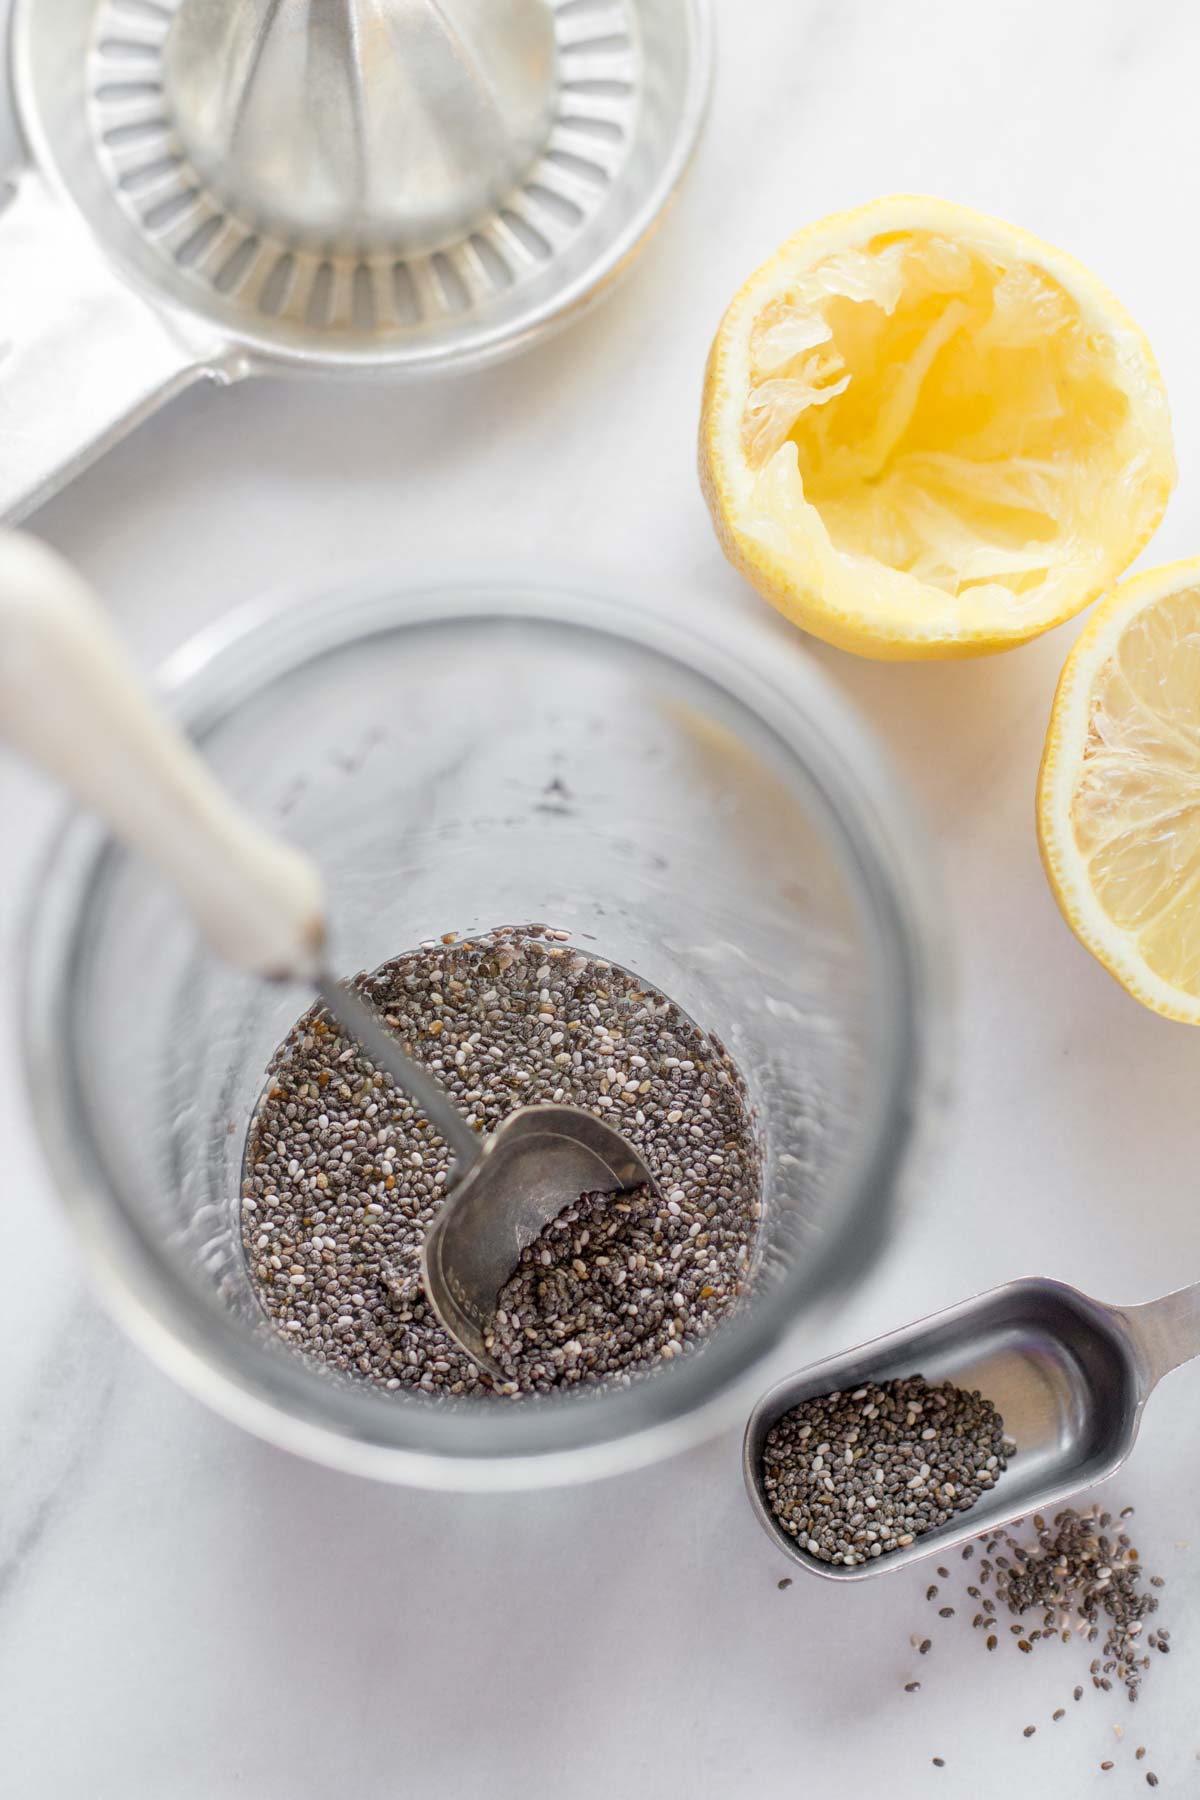 Overhead of chia seeds and a measuring spoon in a tall glass with fresh juices lemon halves.